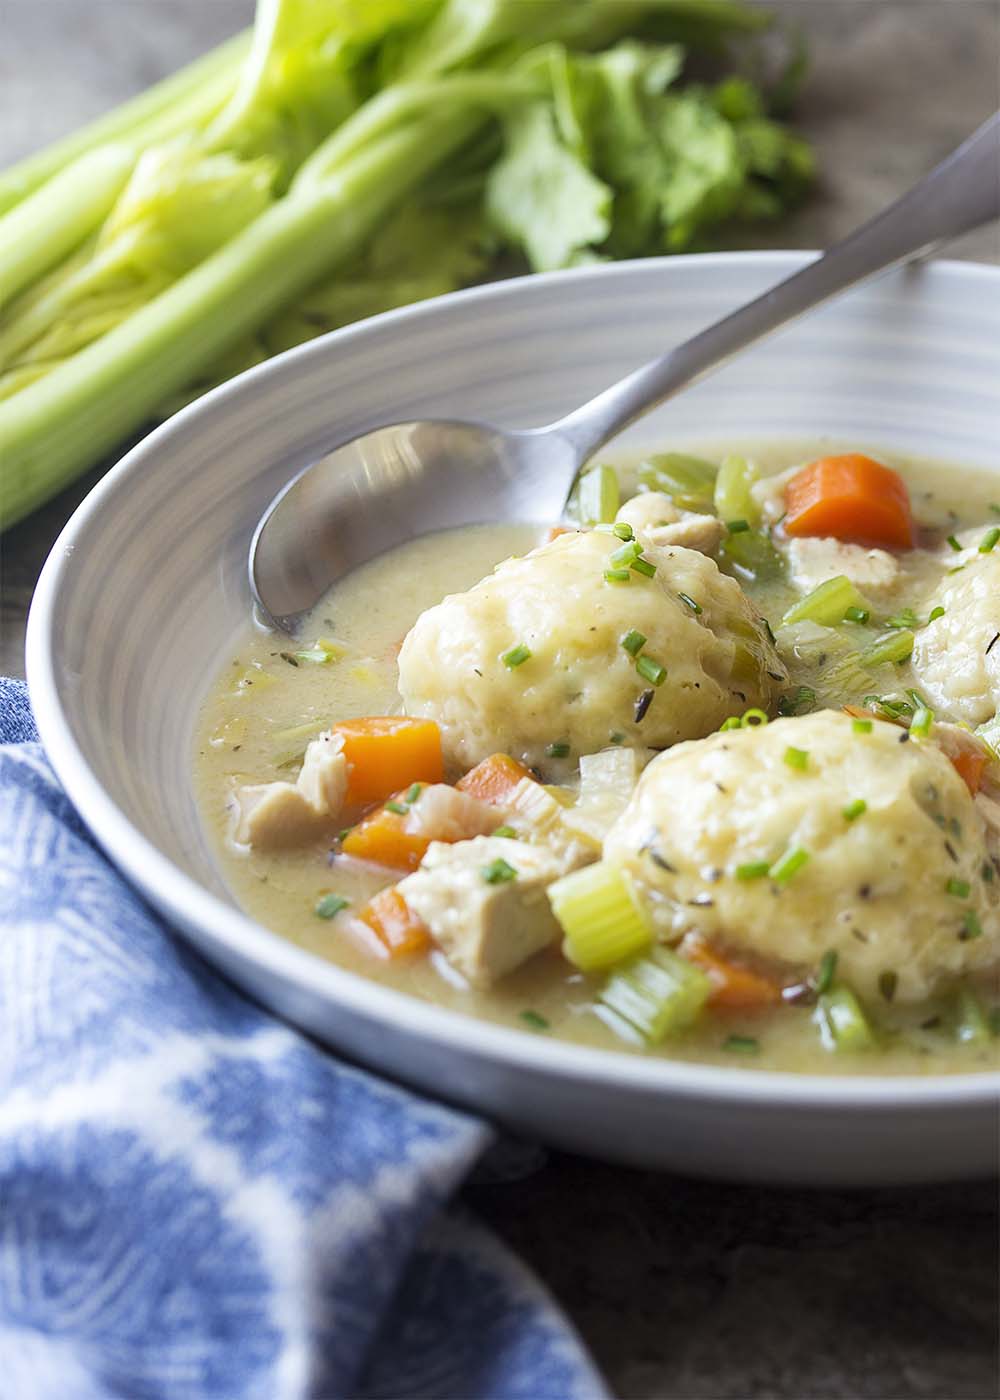 A wide bowl full of homemade chicken and dumplings all topped by fresh chives.